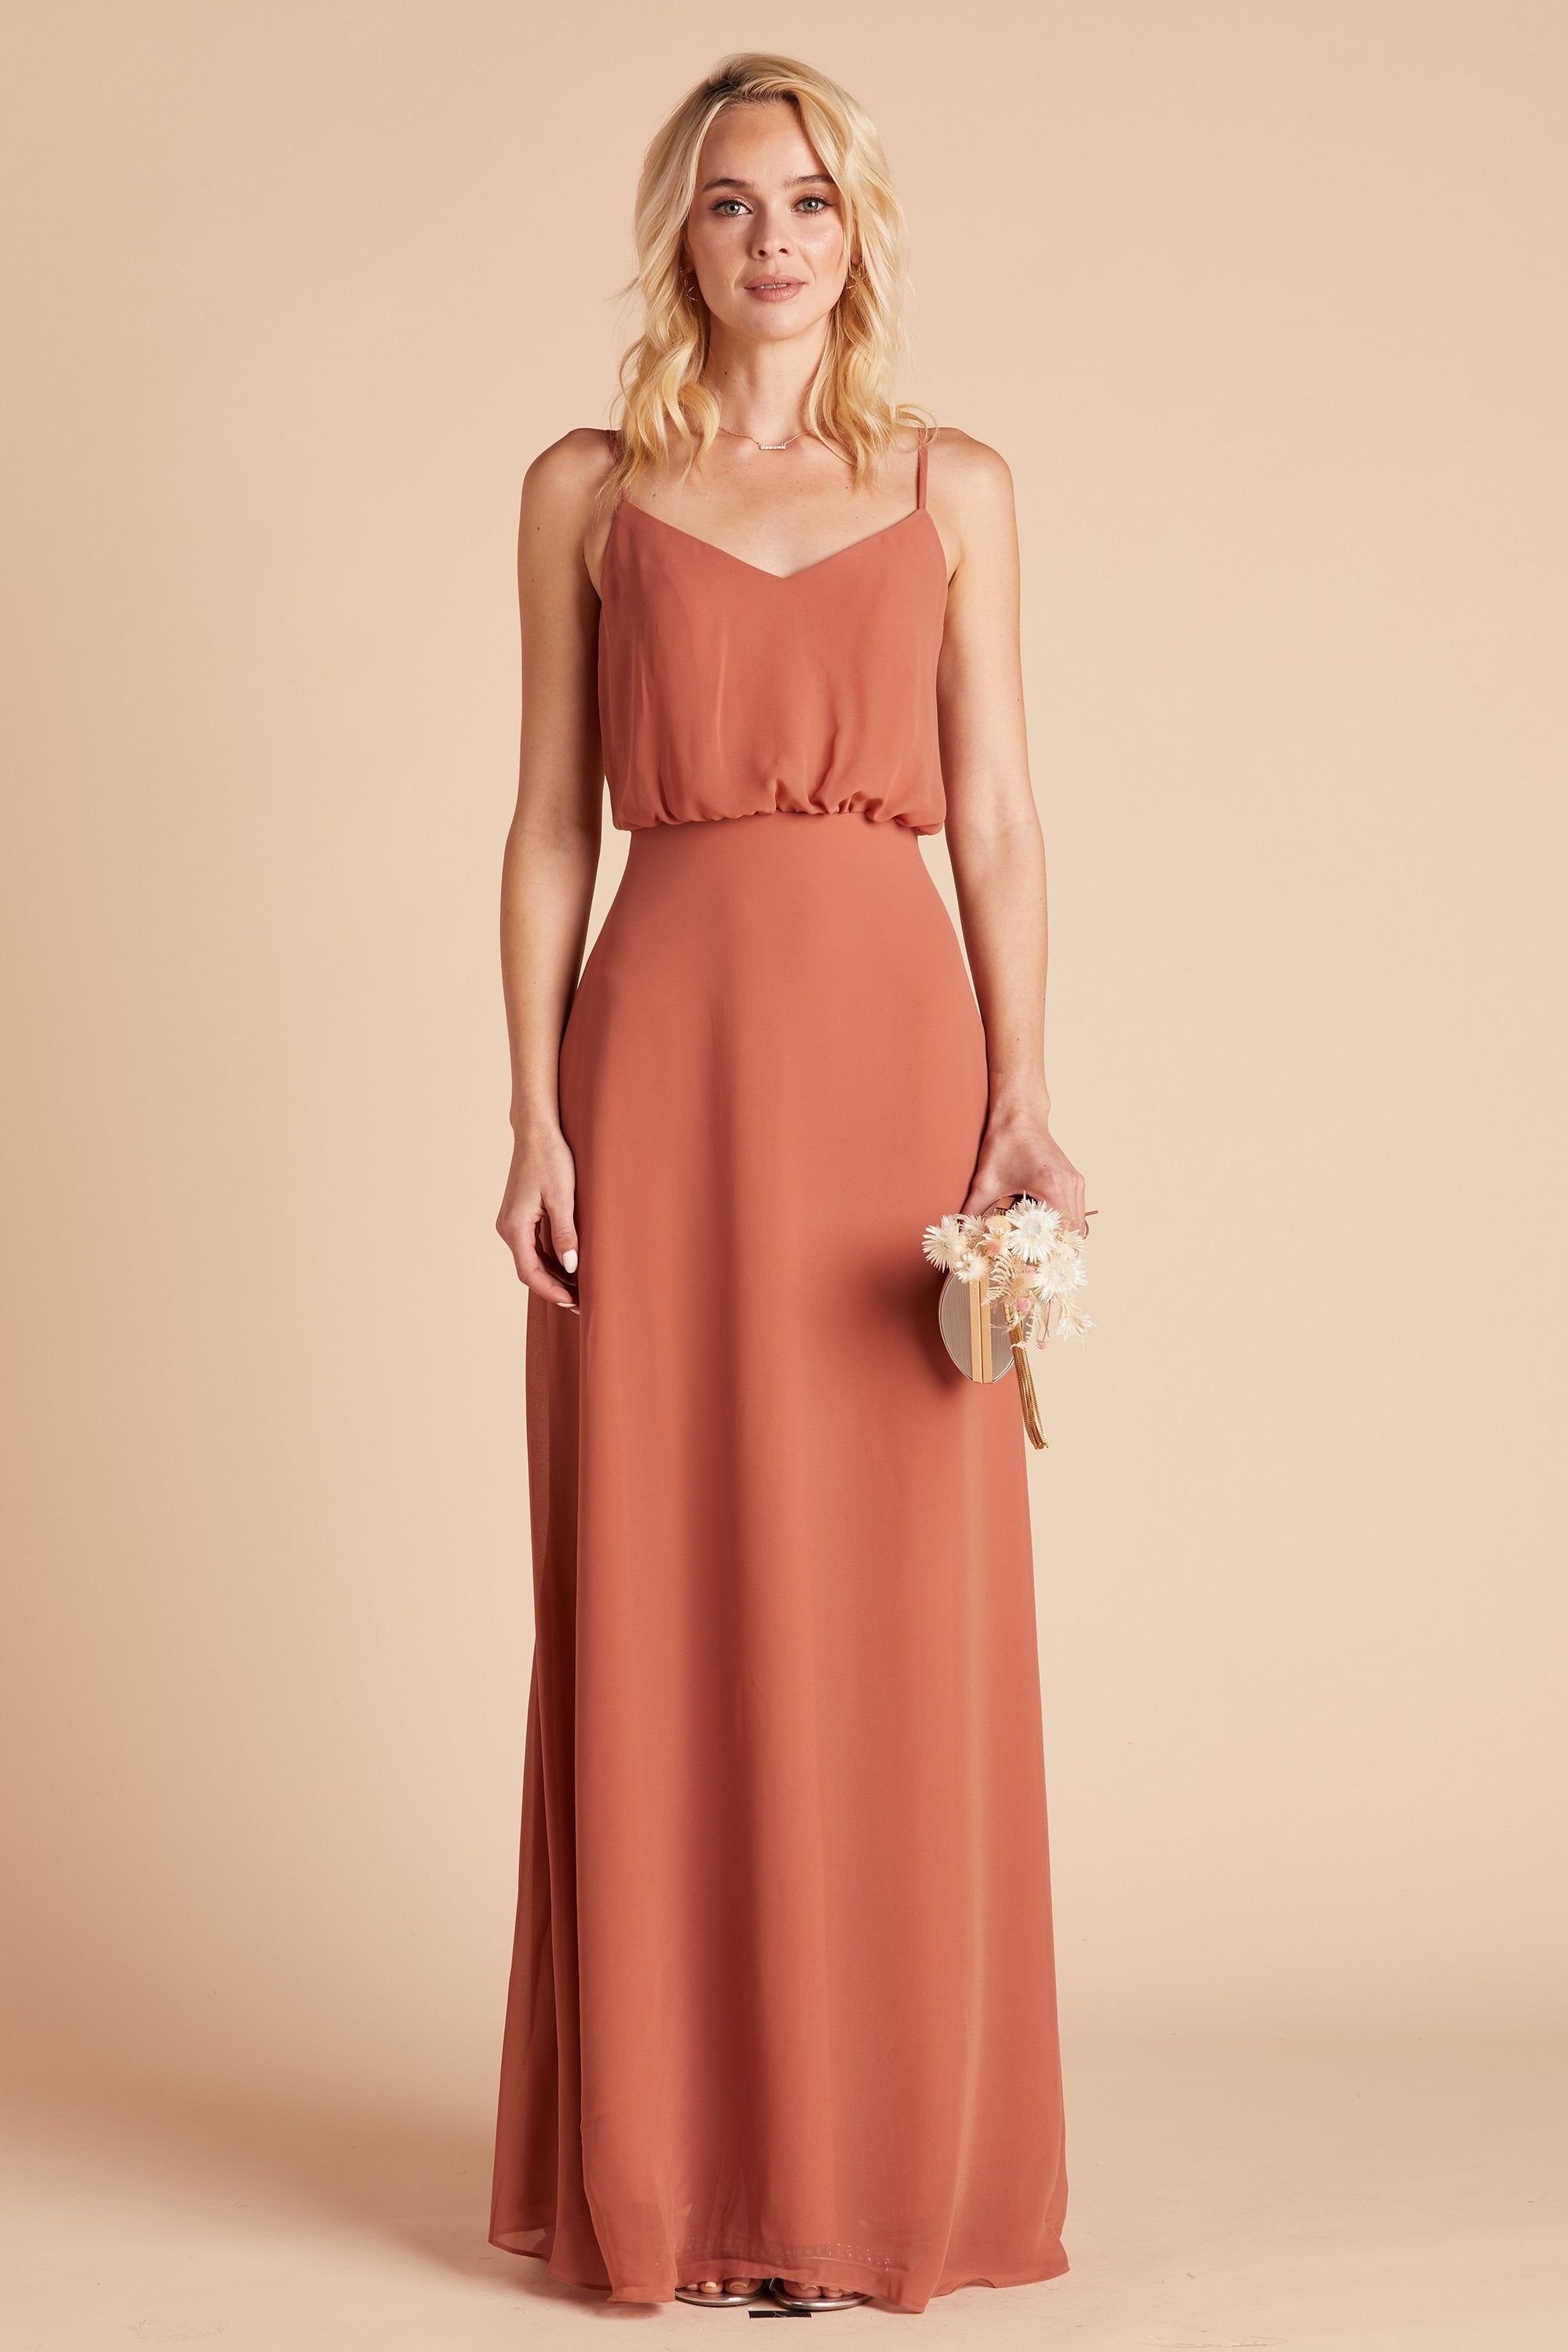 Front view of the Gwennie Dress in terracotta chiffon worn by a slender model with a light skin tone.